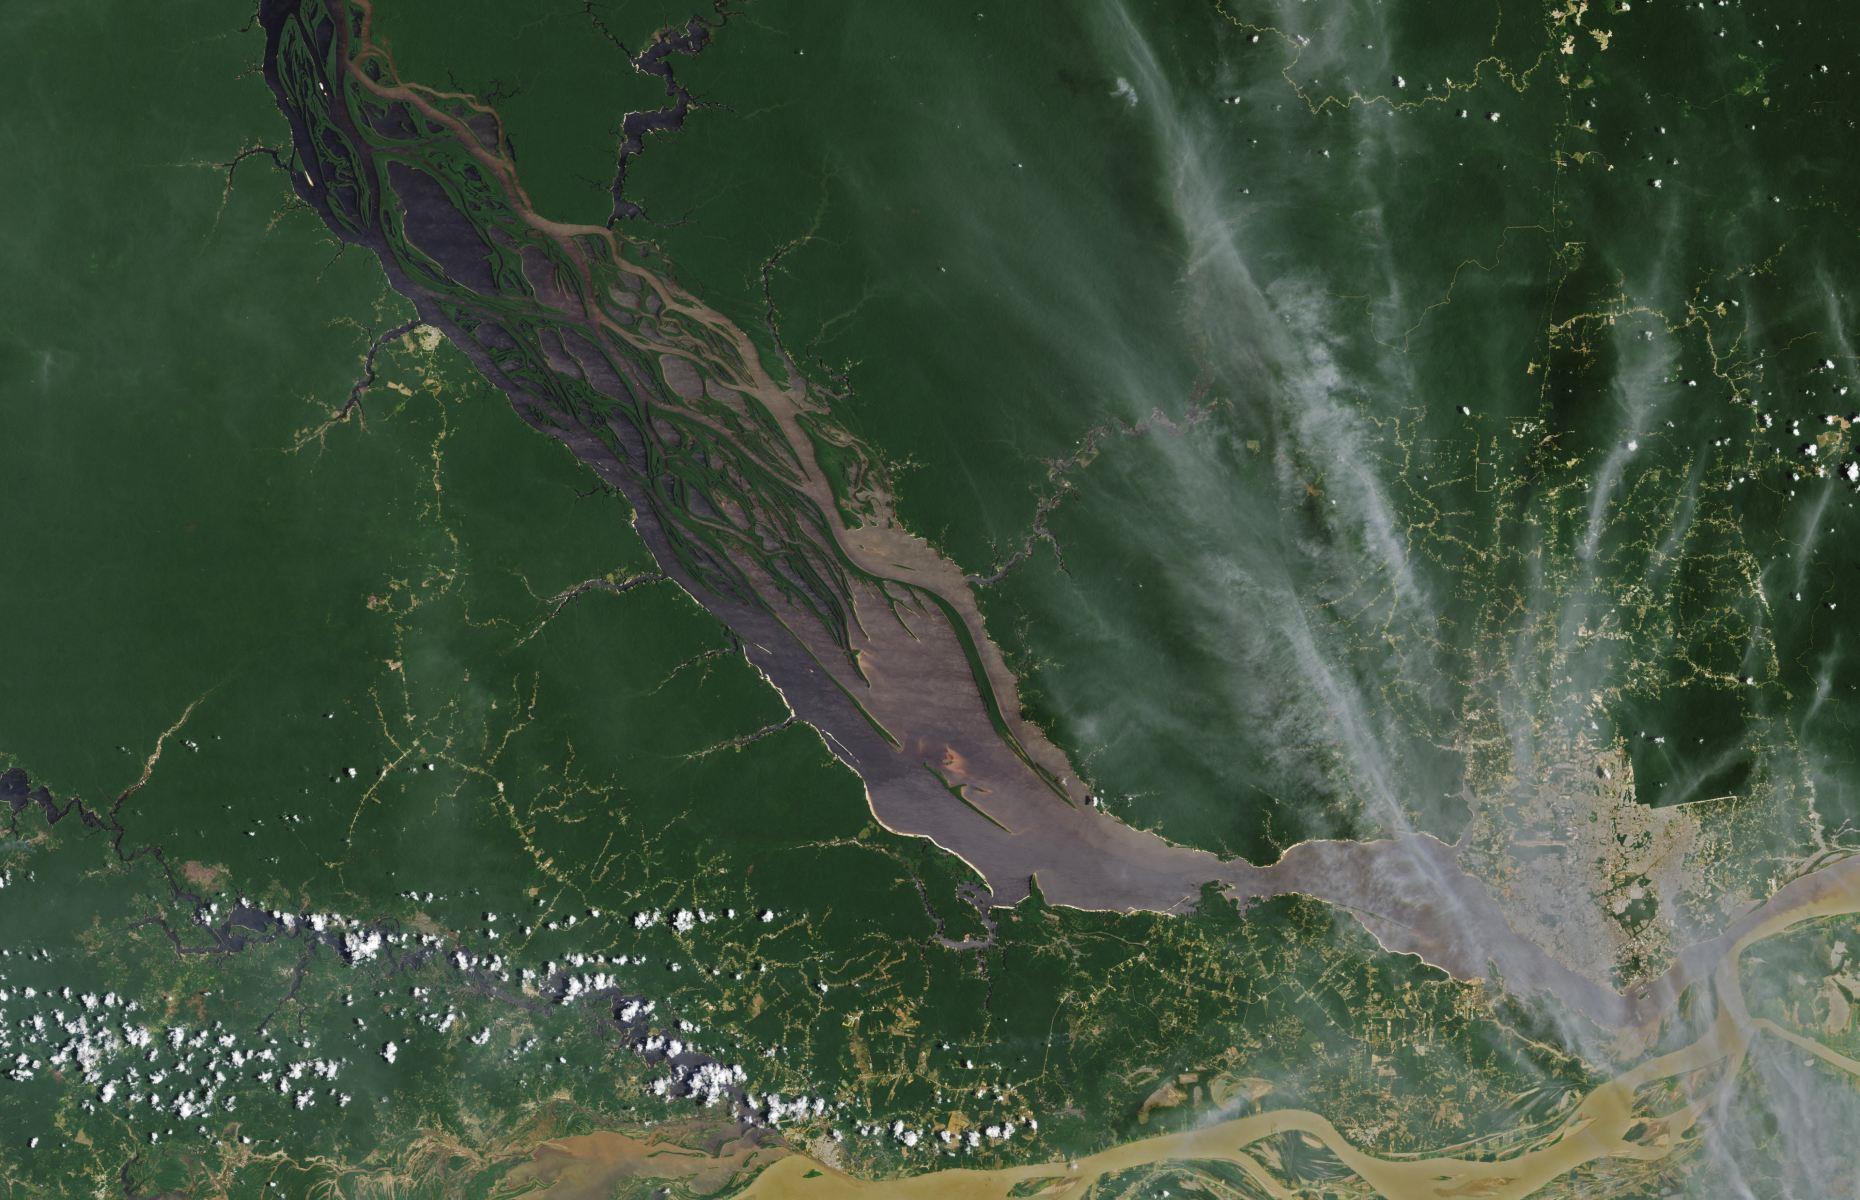 <p>One of the major tributaries of the usually mighty Amazon River, the Rio Negro originates in several headstreams that ultimately enter Brazil from Colombia and Venezuela. Named for its dark waters, it meets with the Amazon at the port city of Manaus, where its jet-black colouring clashes with the yellowish hue of South America’s largest river. Here, NASA Earth Observatory's aerial image shows the Rio Negro on 8 October 2022, where its water sits at 64.3 feet high (19.59m), a typical level for that time of year.</p>